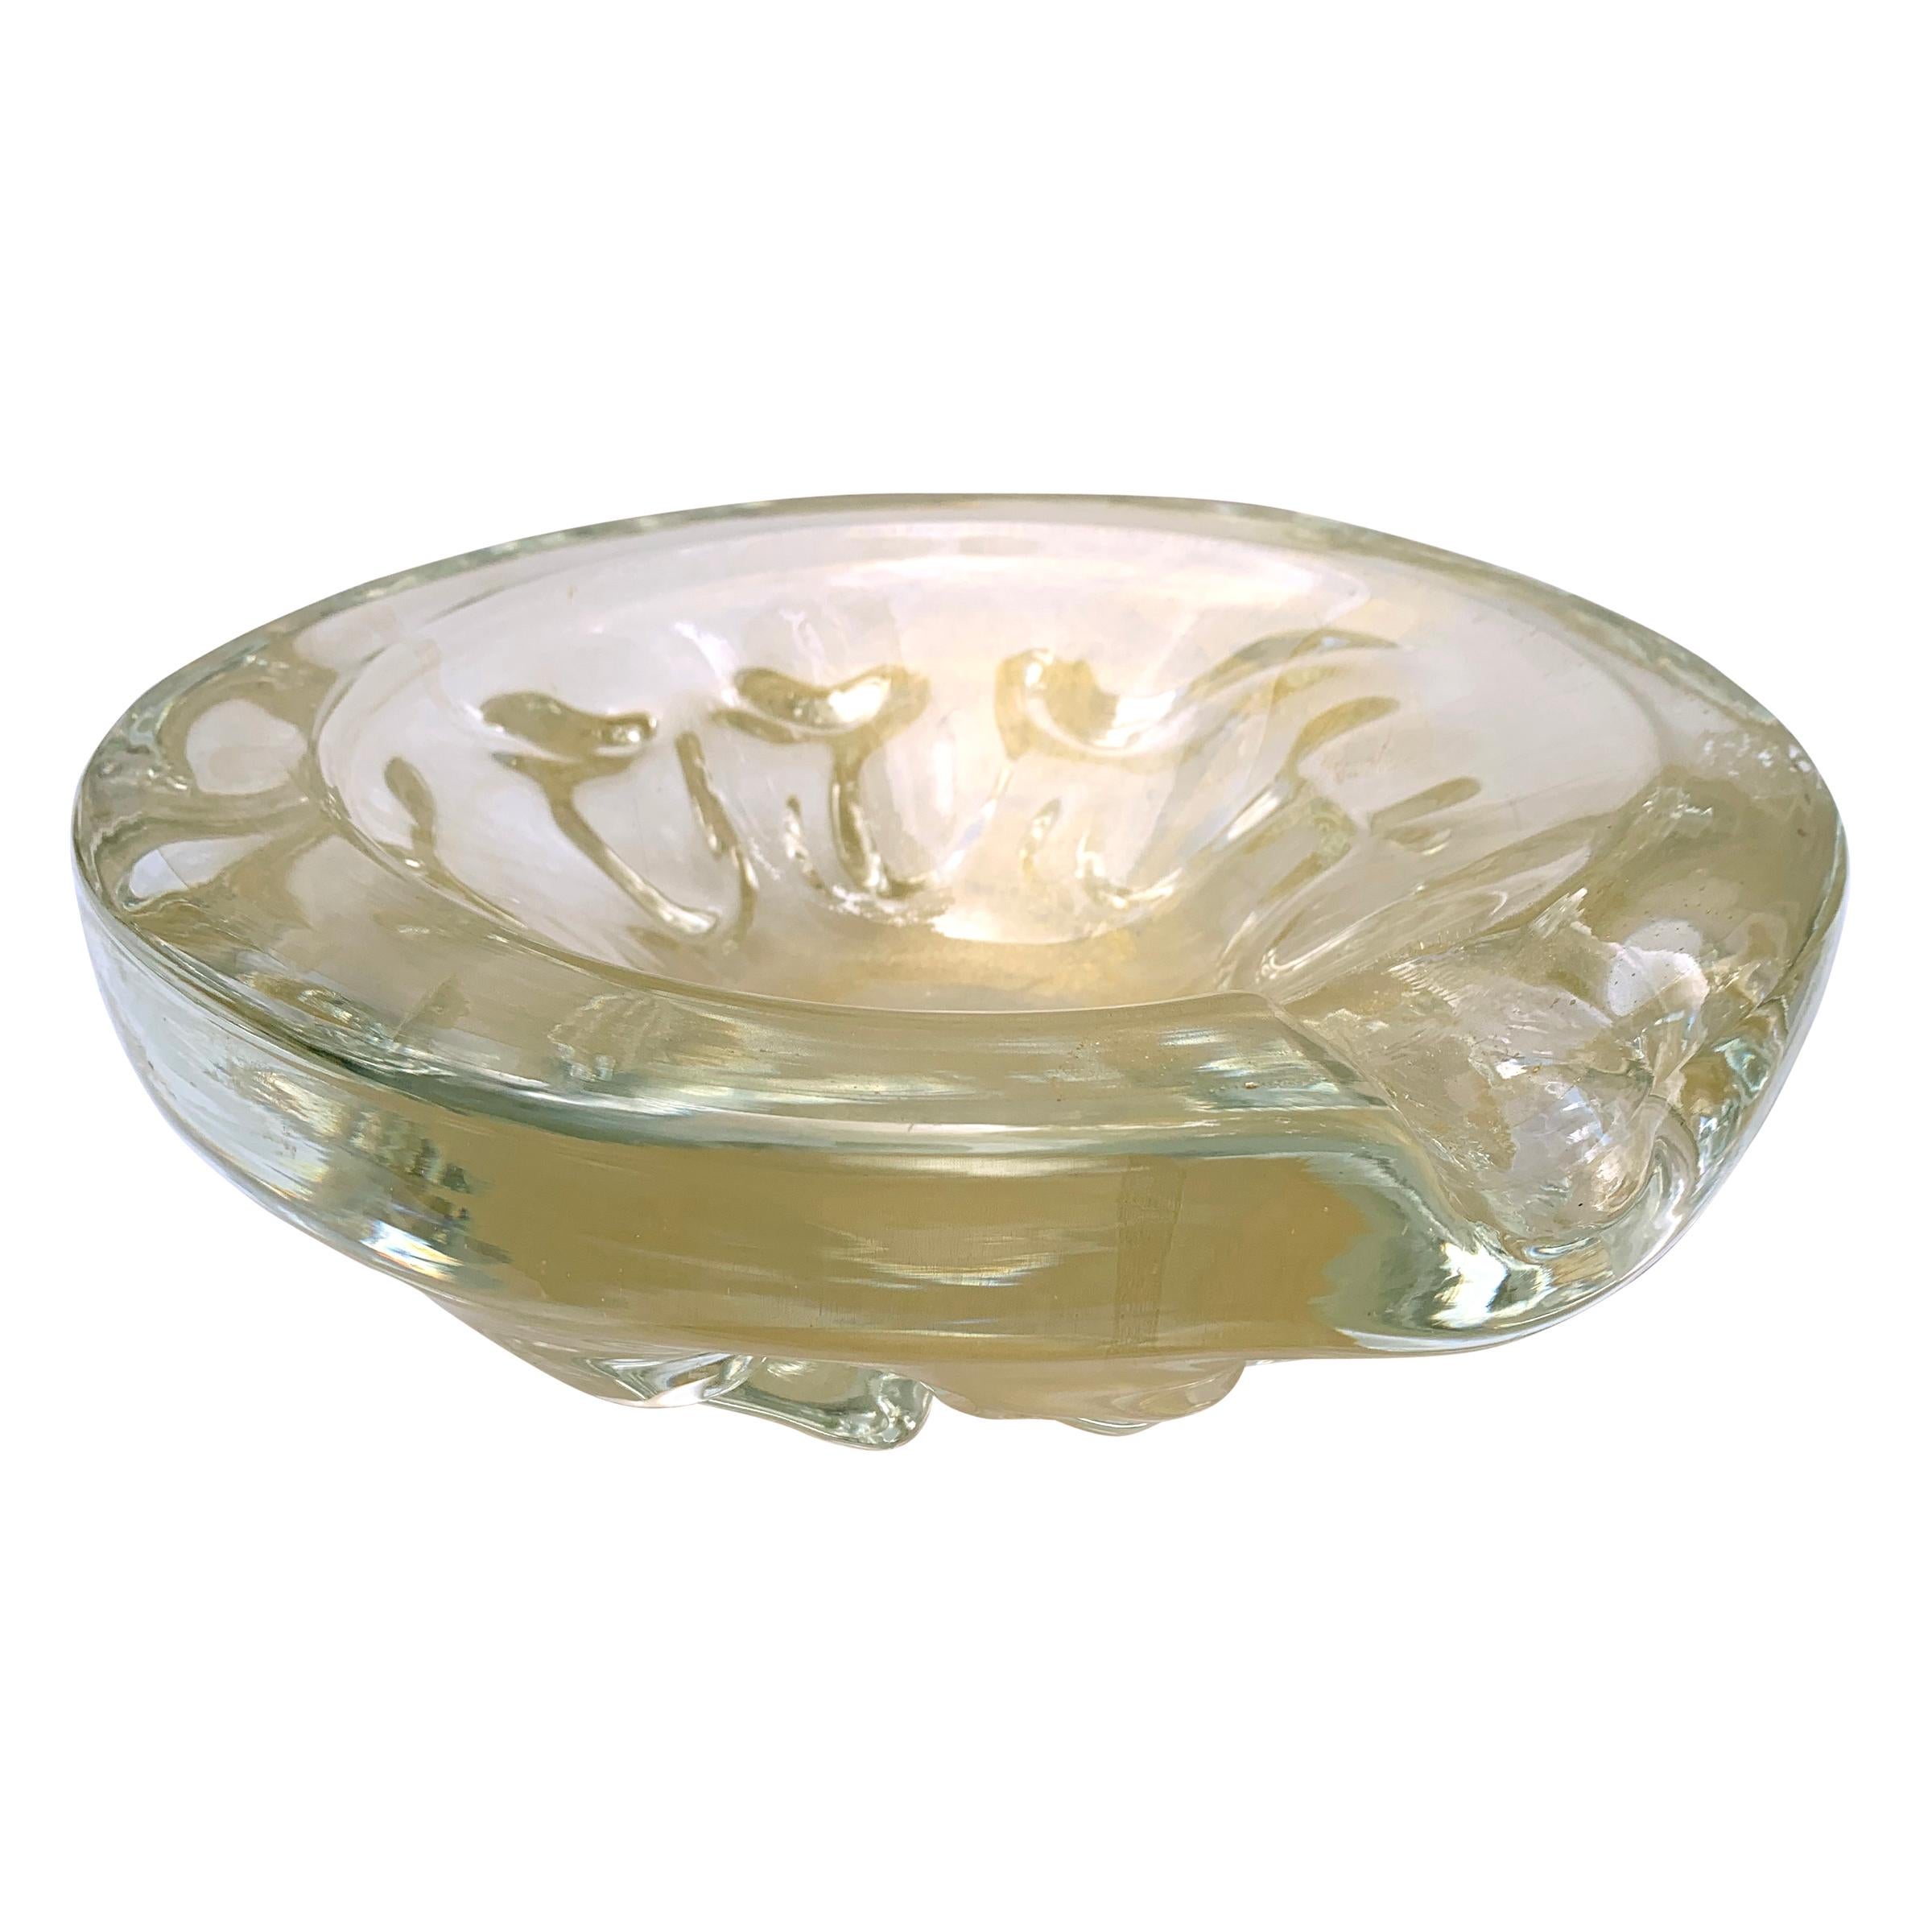 A massive mid-20th century Italian Murano (possibly Seguso) gold aventurine cigar ashtray with a wonderful hand blown undulating form, and large enough for a crowd, and beautiful enough to serve guests from at your next party.